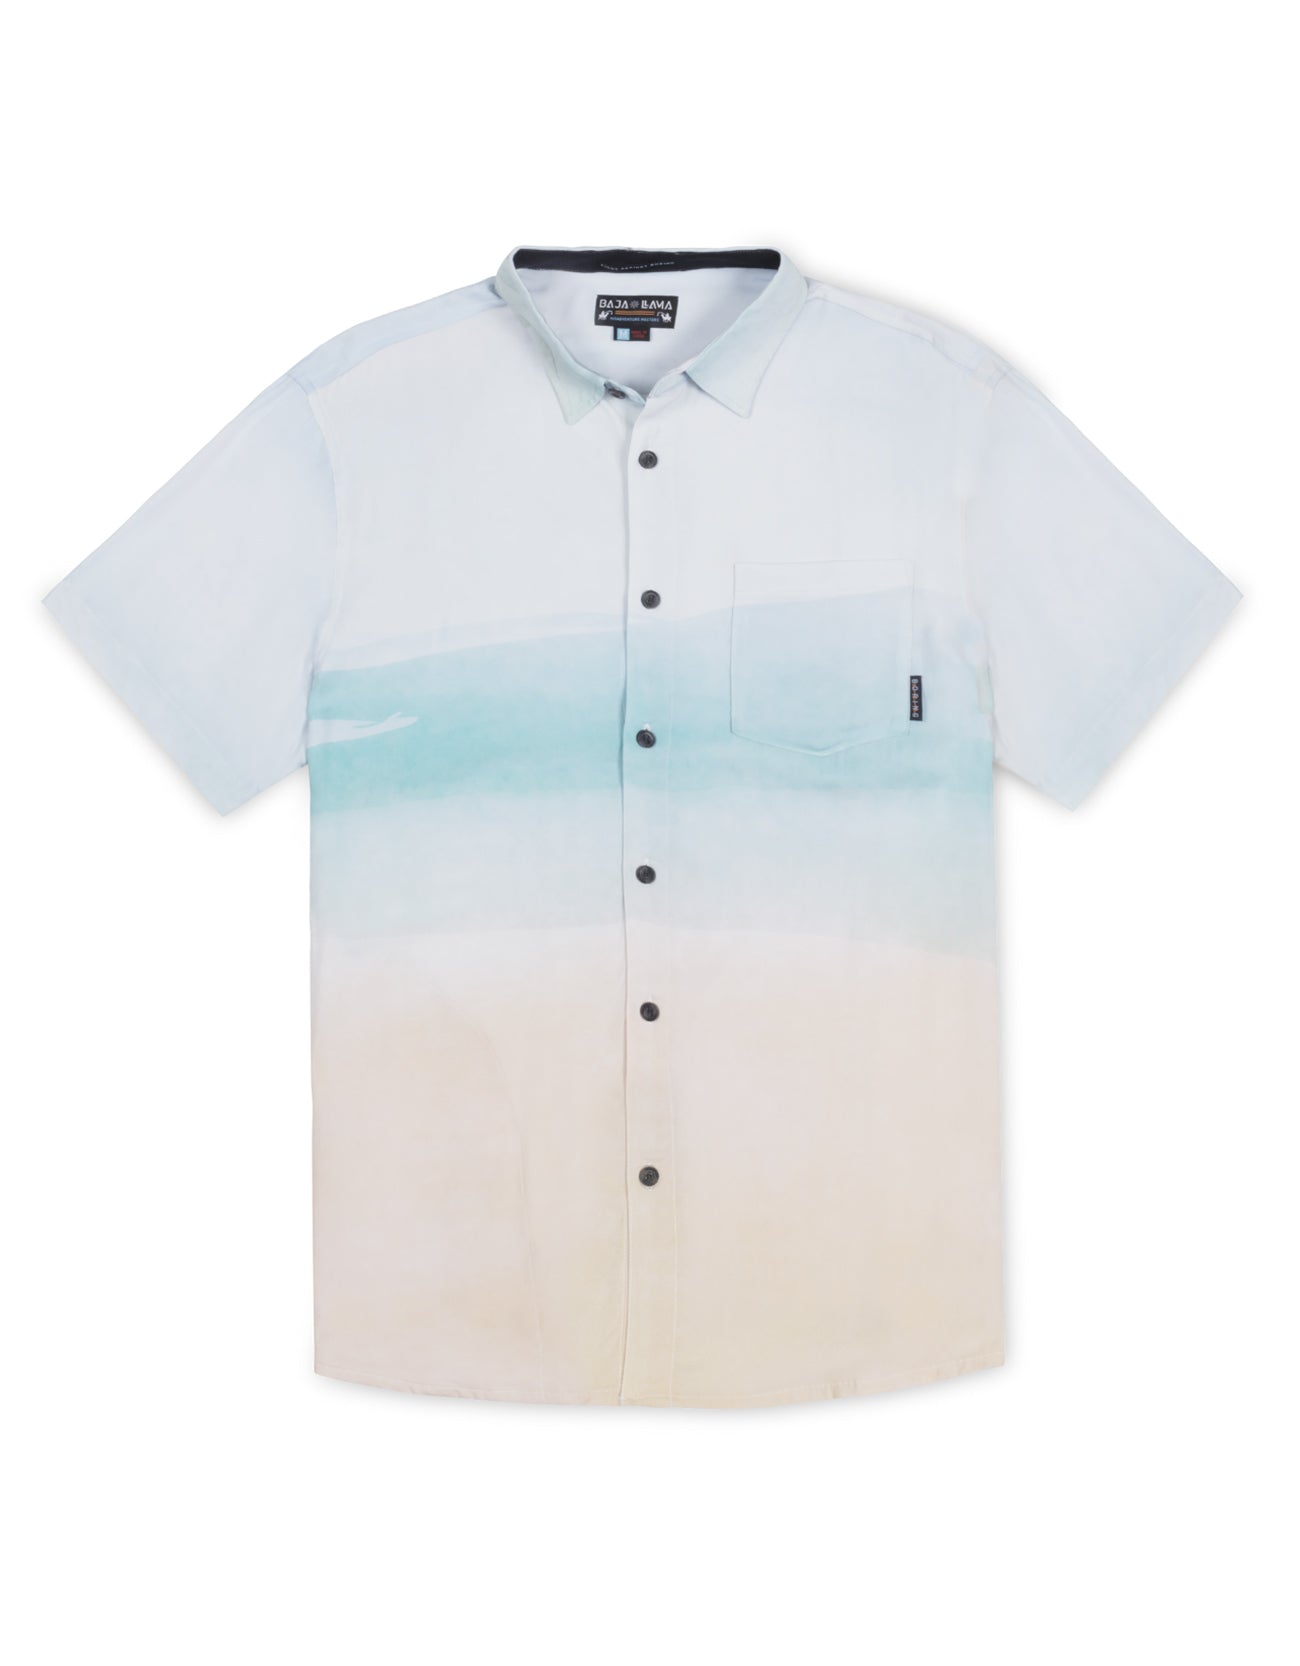 Light blue watercolor gradient button up featuring Bahamas's sandy pink beaches 